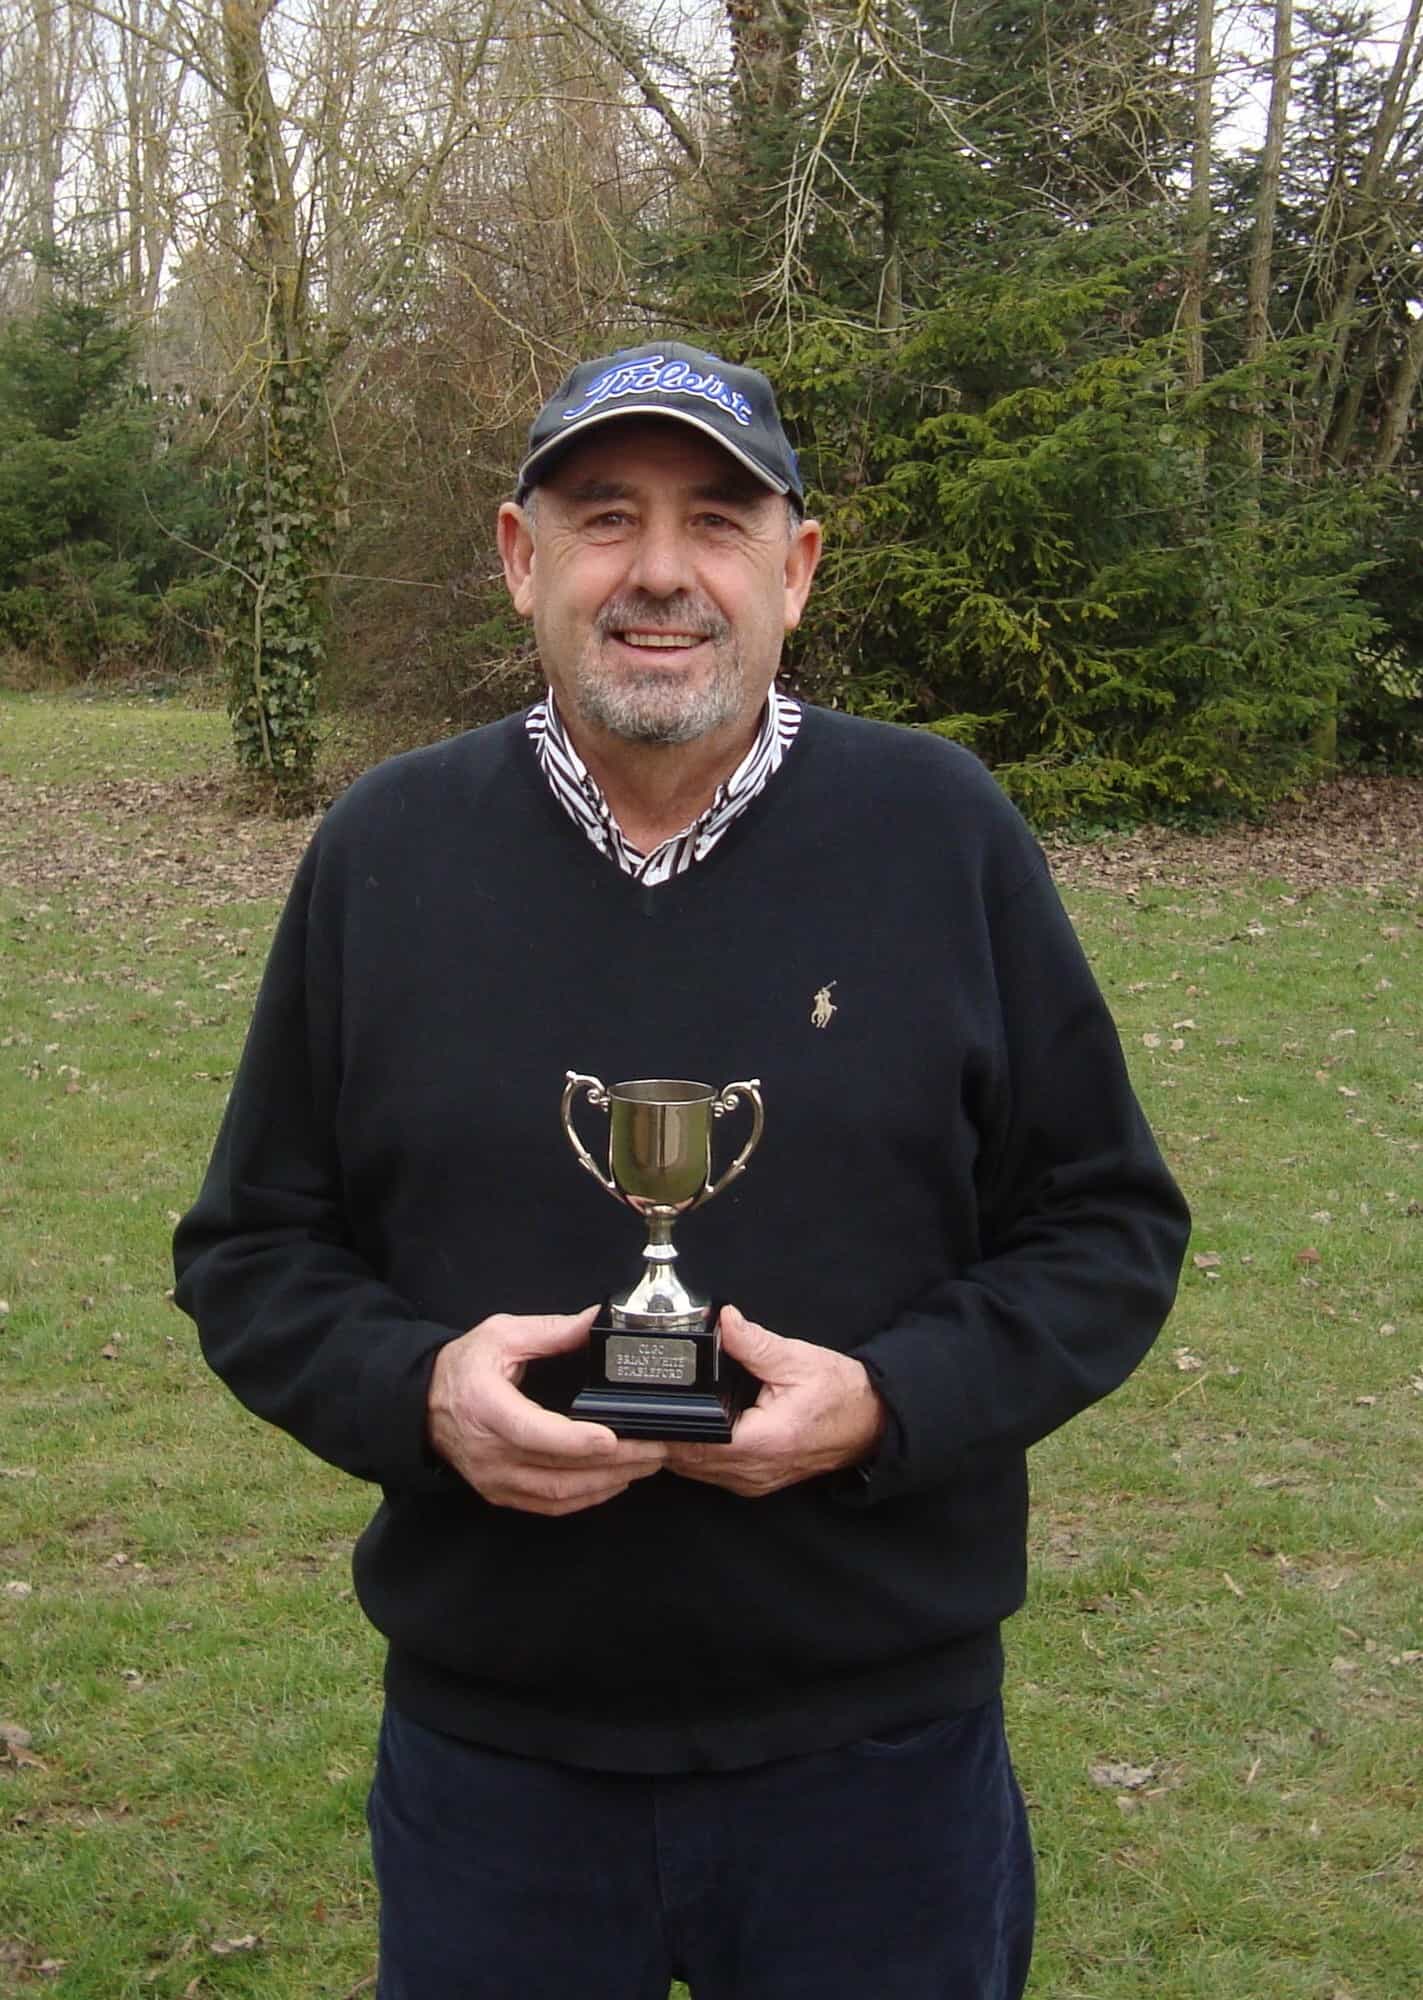 Richard Poyser poses with the trophy